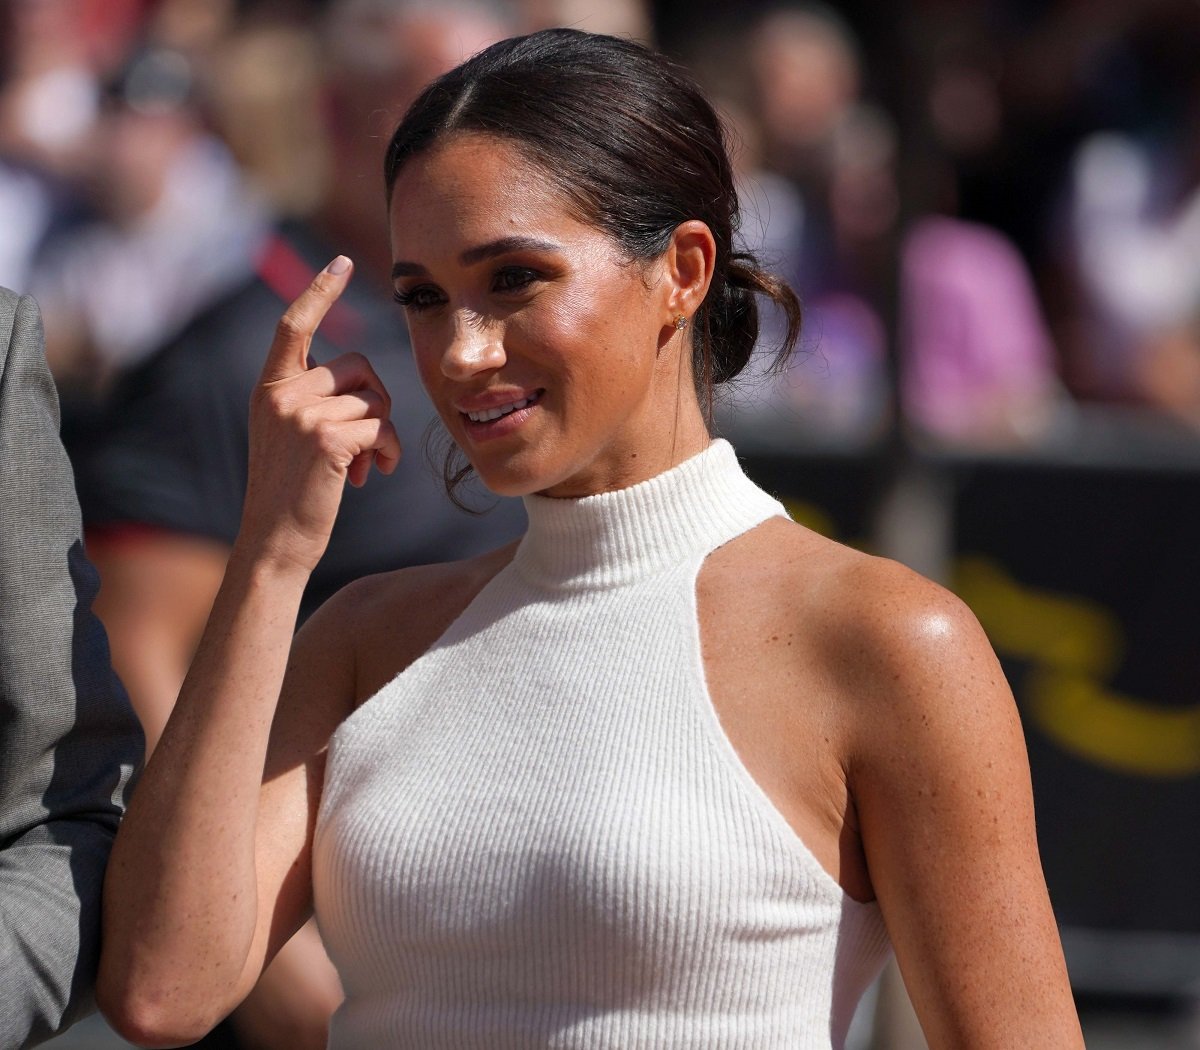 Meghan Markle,who's "equal" body language has been analyzed by an expert, arrives in Germany for the Invictus Games Dusseldorf 2023 One Year to Go event